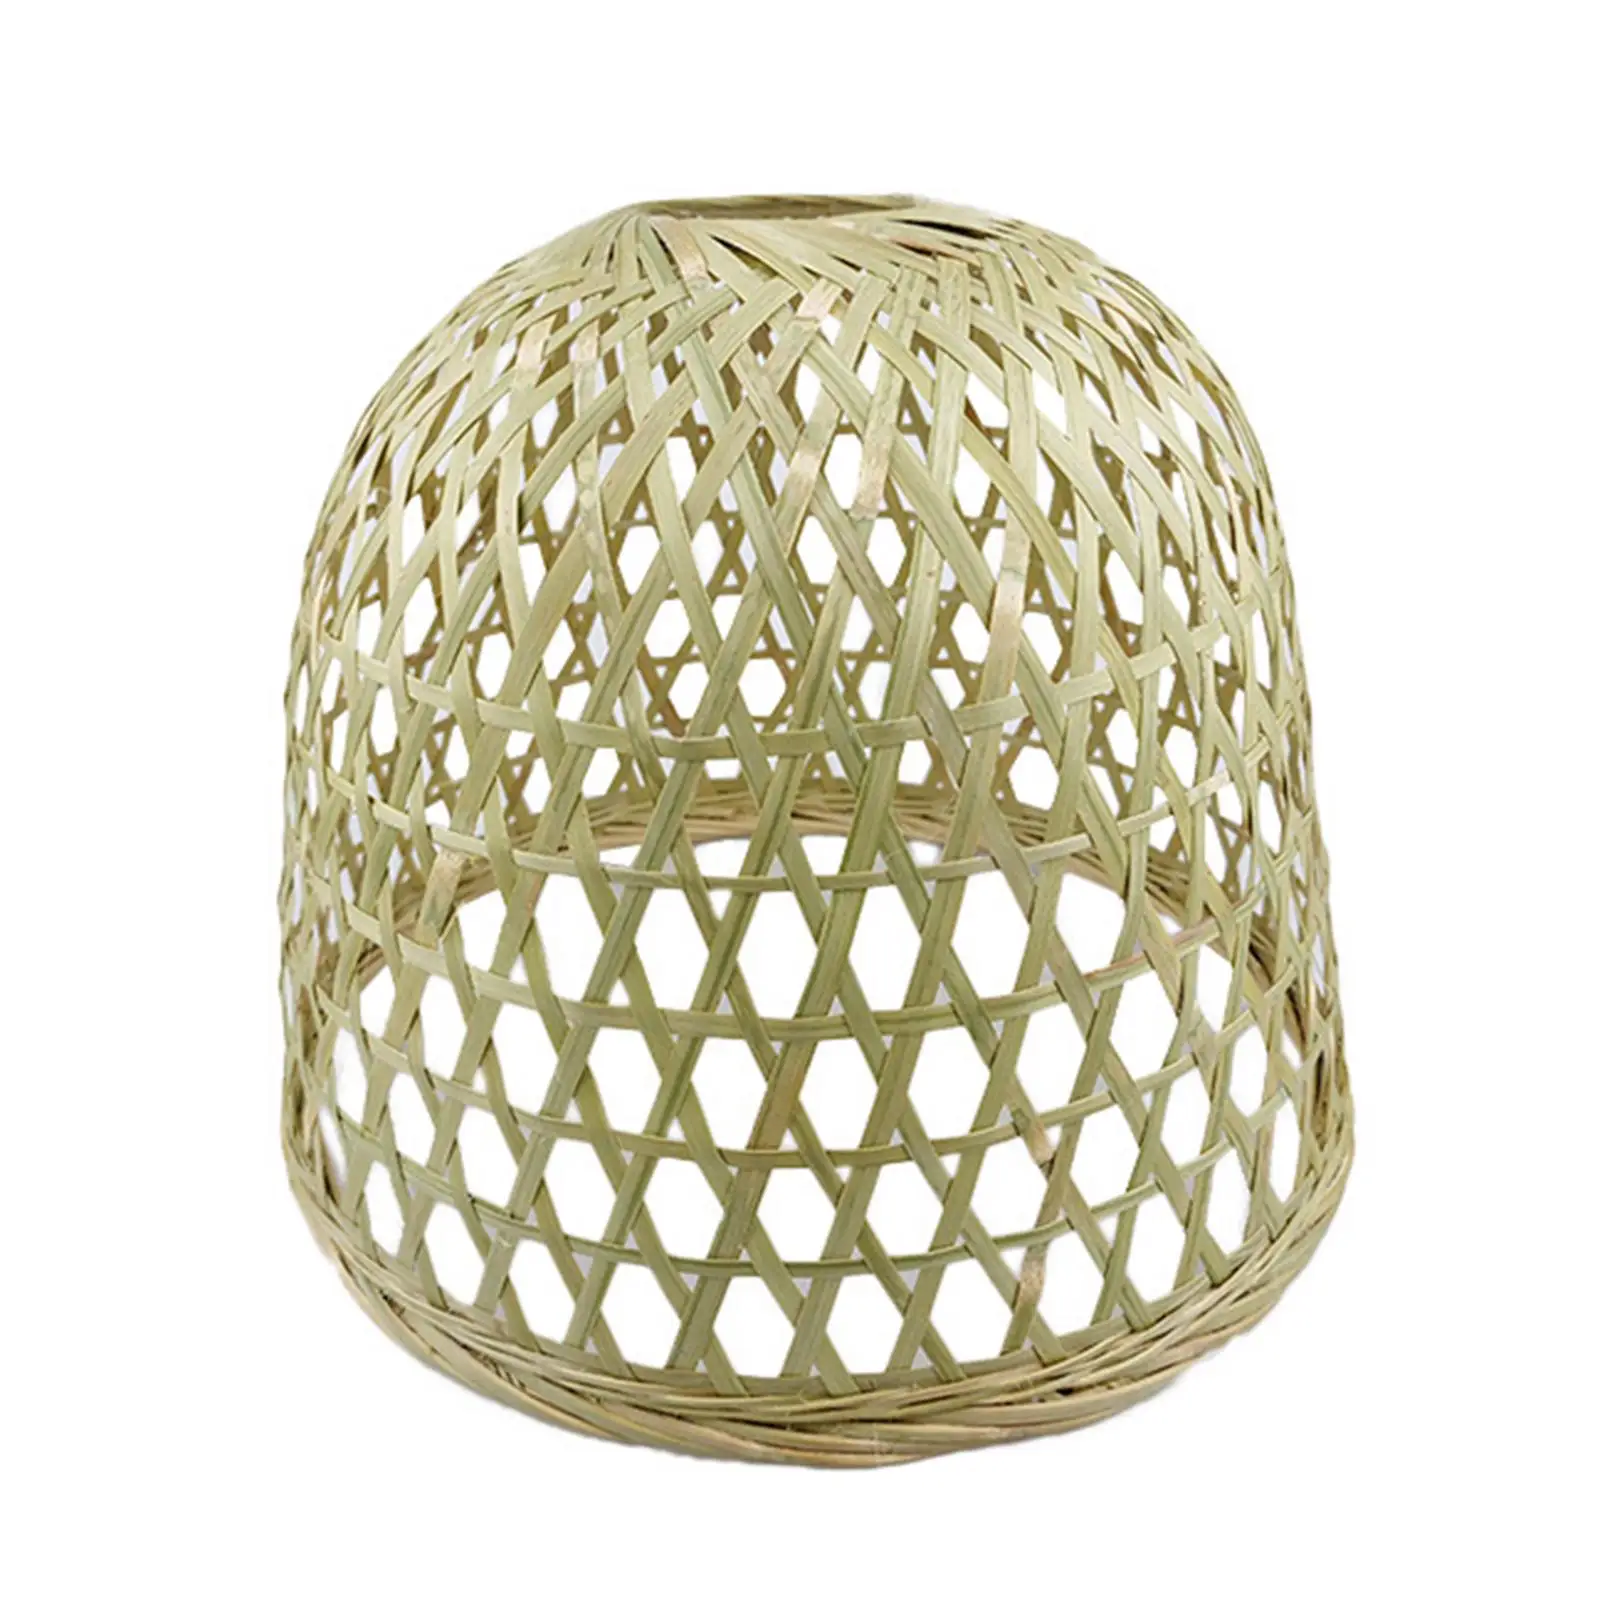 Bamboo Woven Hanging Chandelier Lampshade Vintage Decoration Domed Shape Minimalist Easy Install for Dining Room Kitchen Island